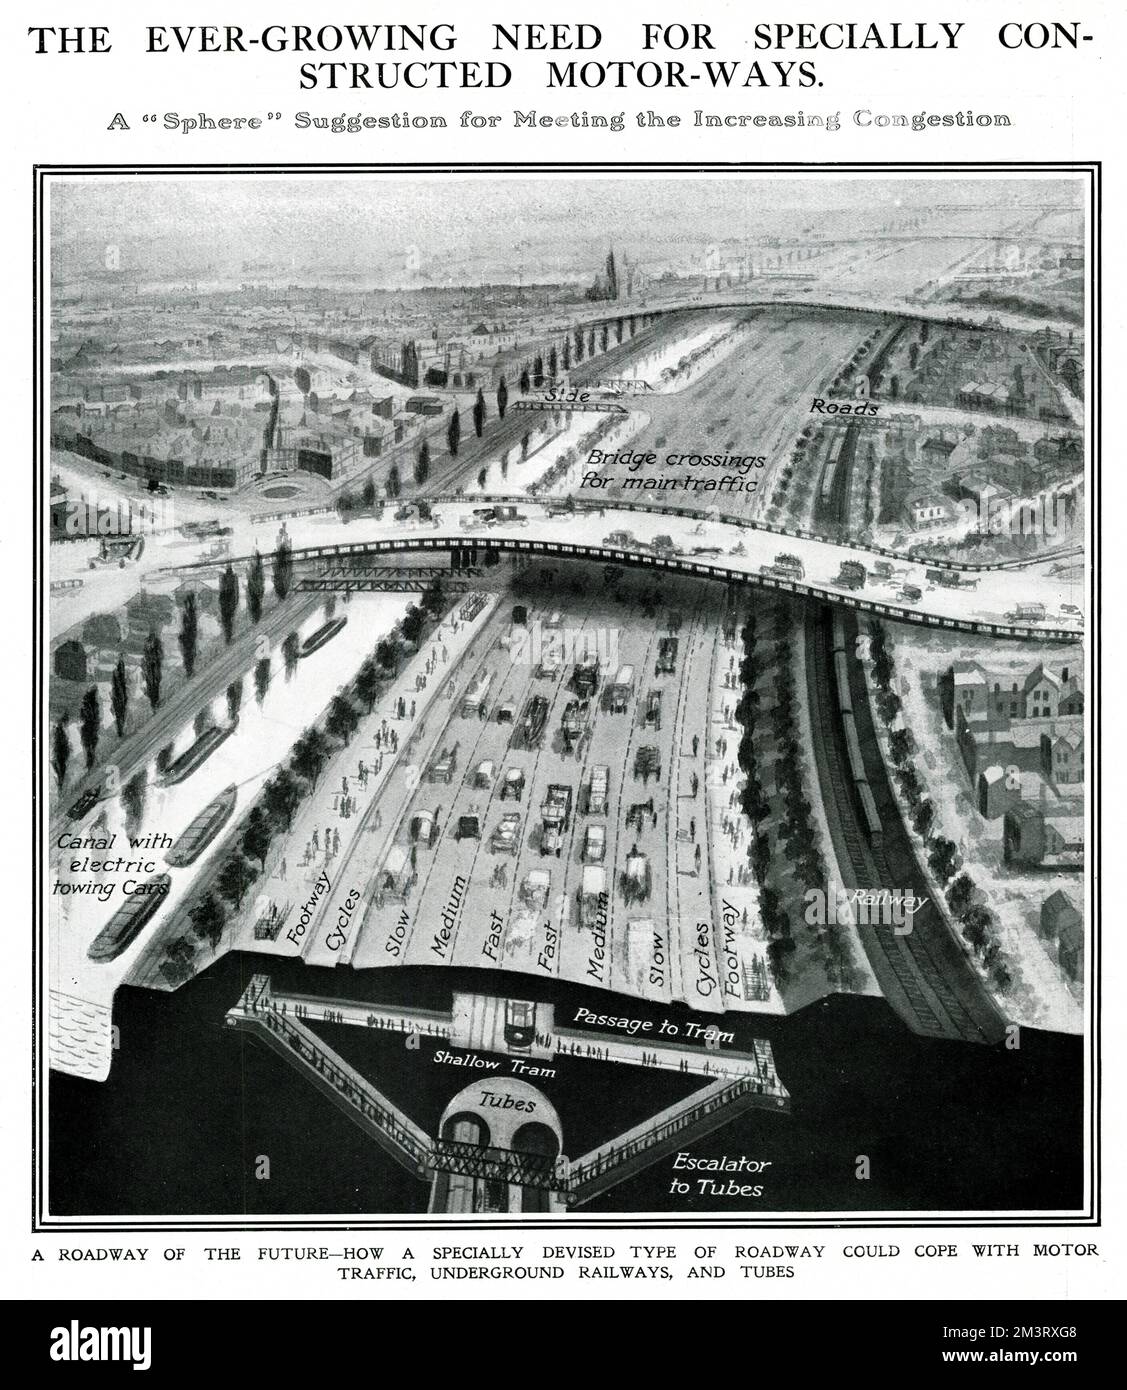 Illustration suggesting the need for specially constructed 'motor-ways' to help ease increasing traffic congestion in 1924.  The drawing accompanies an article by R. P. Hearne, and shows slow, medium and fast lanes of traffic alongside railways lines, barges on canals, trams just below the surface and tube trains deeper underground.       Date: 1924 Stock Photo